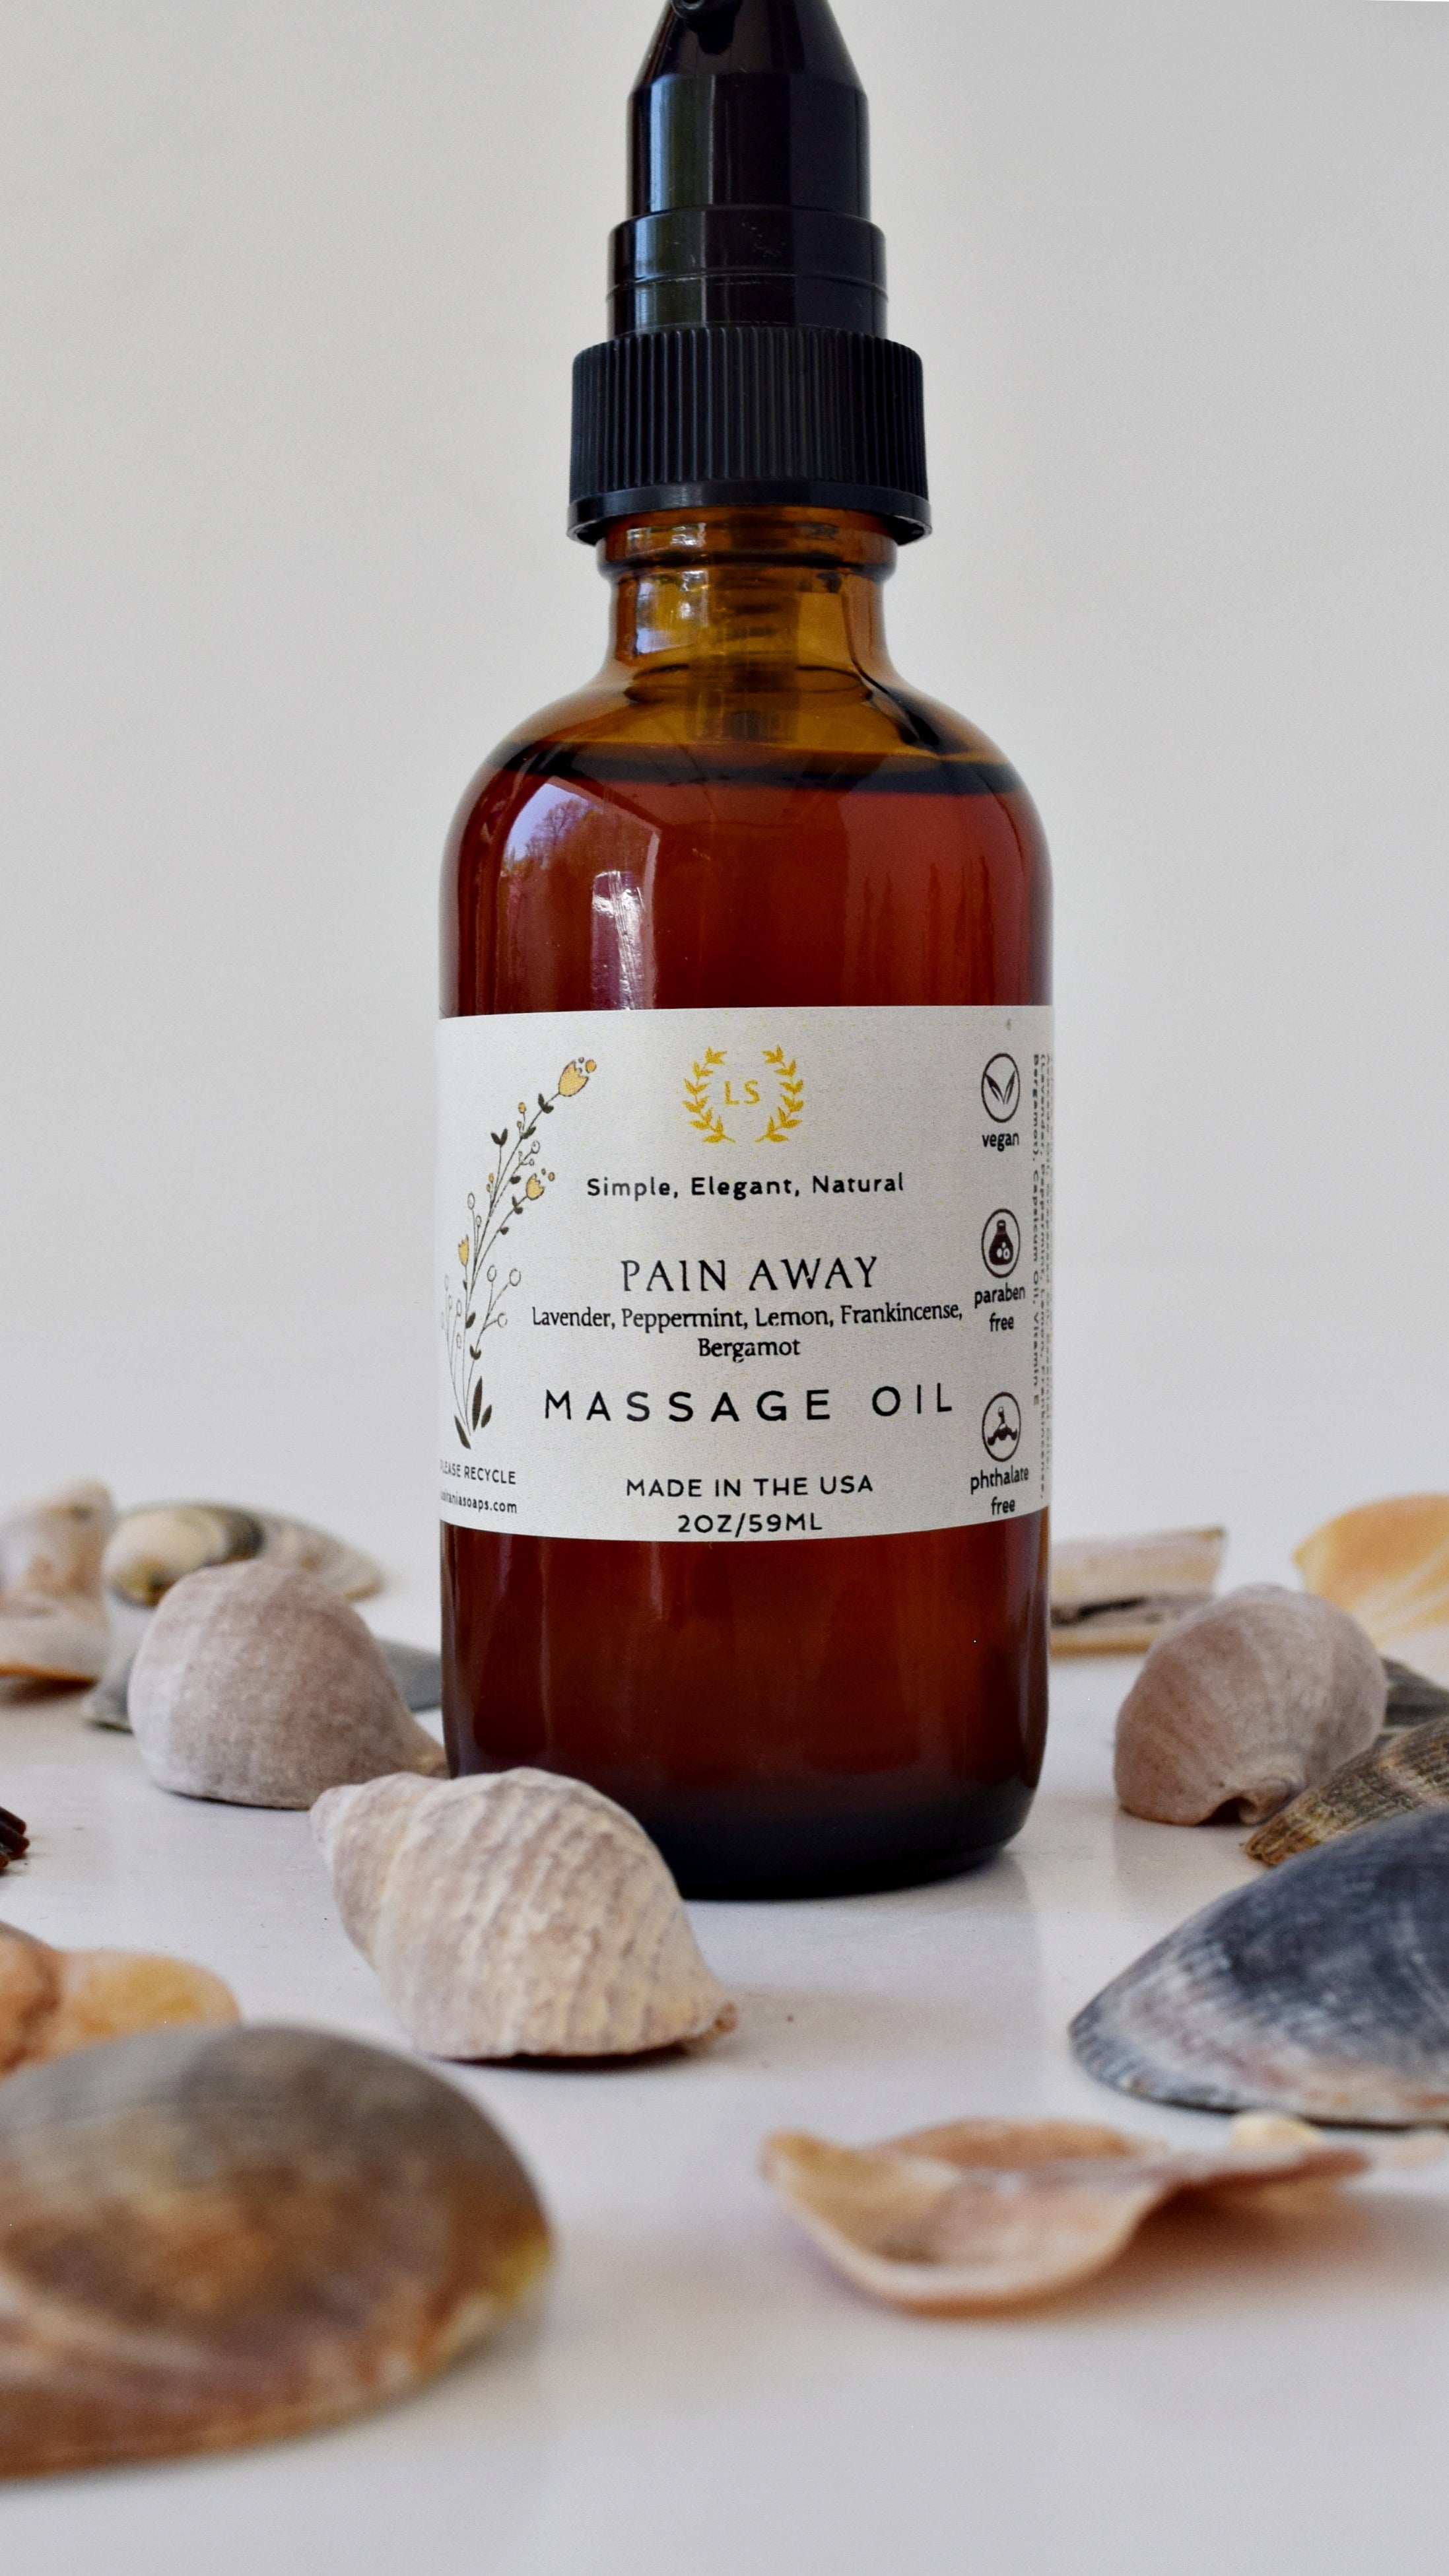 Massage Oil Pain Away - For Sore Muscles, Back & Knee Pain with